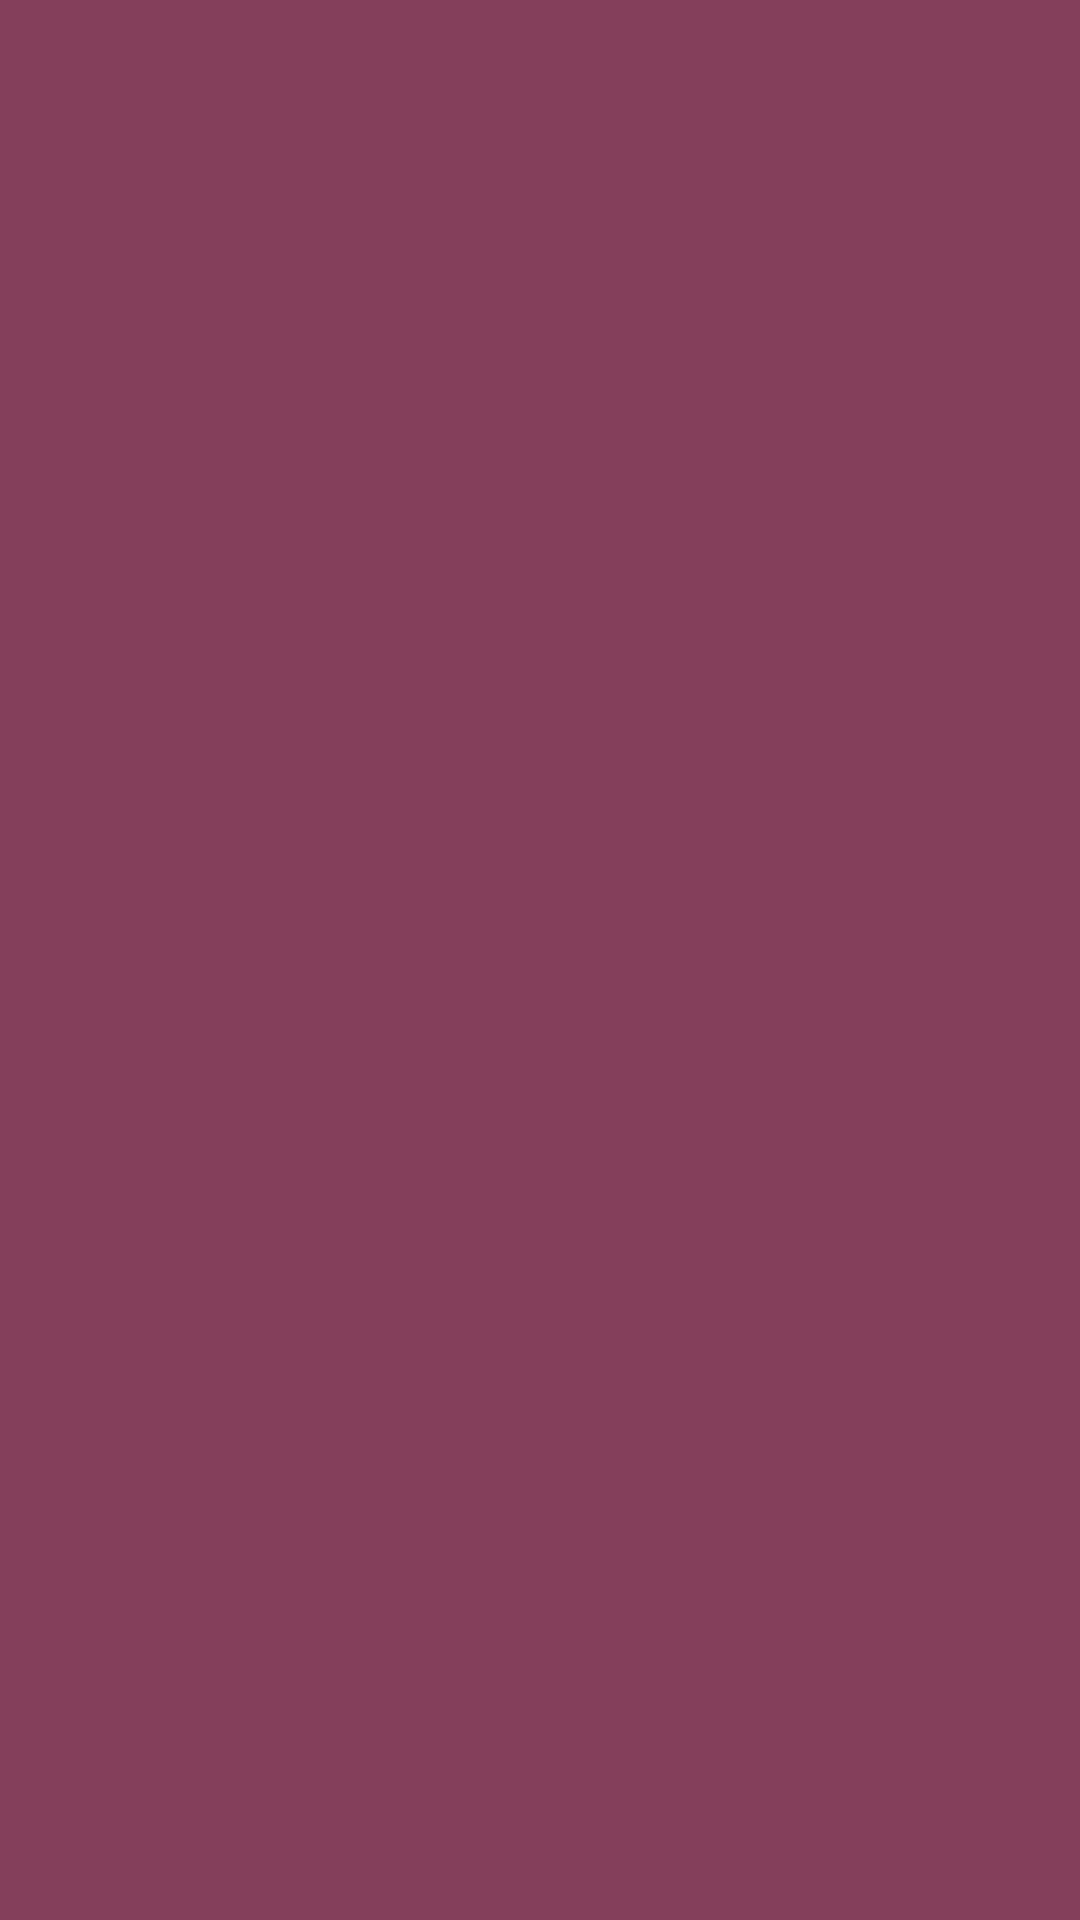 1080x1920 Deep Ruby Solid Color Background